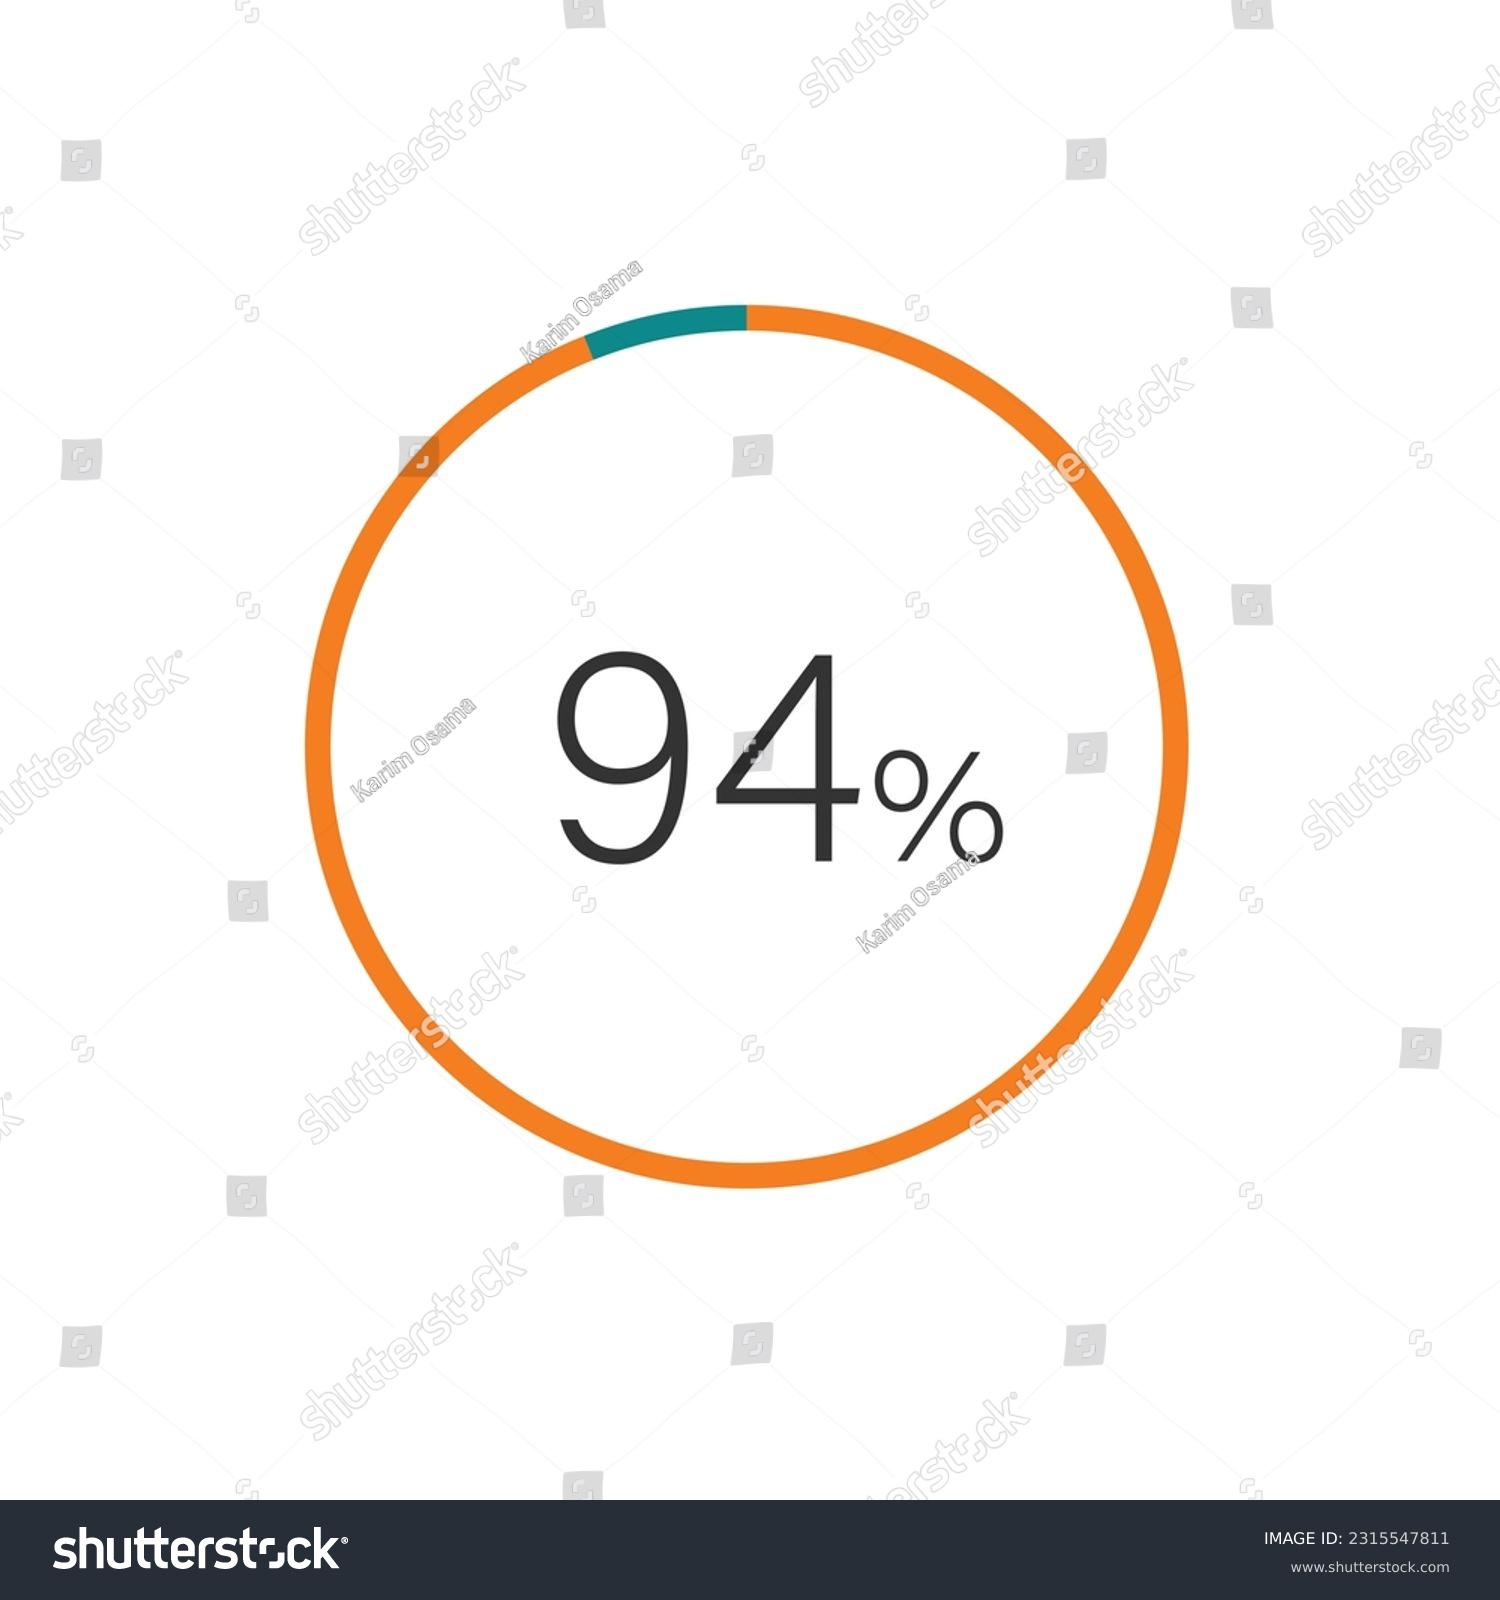 SVG of 94% percent circle chart symbol. 94 percentage Icons for business, finance, report, downloading. svg